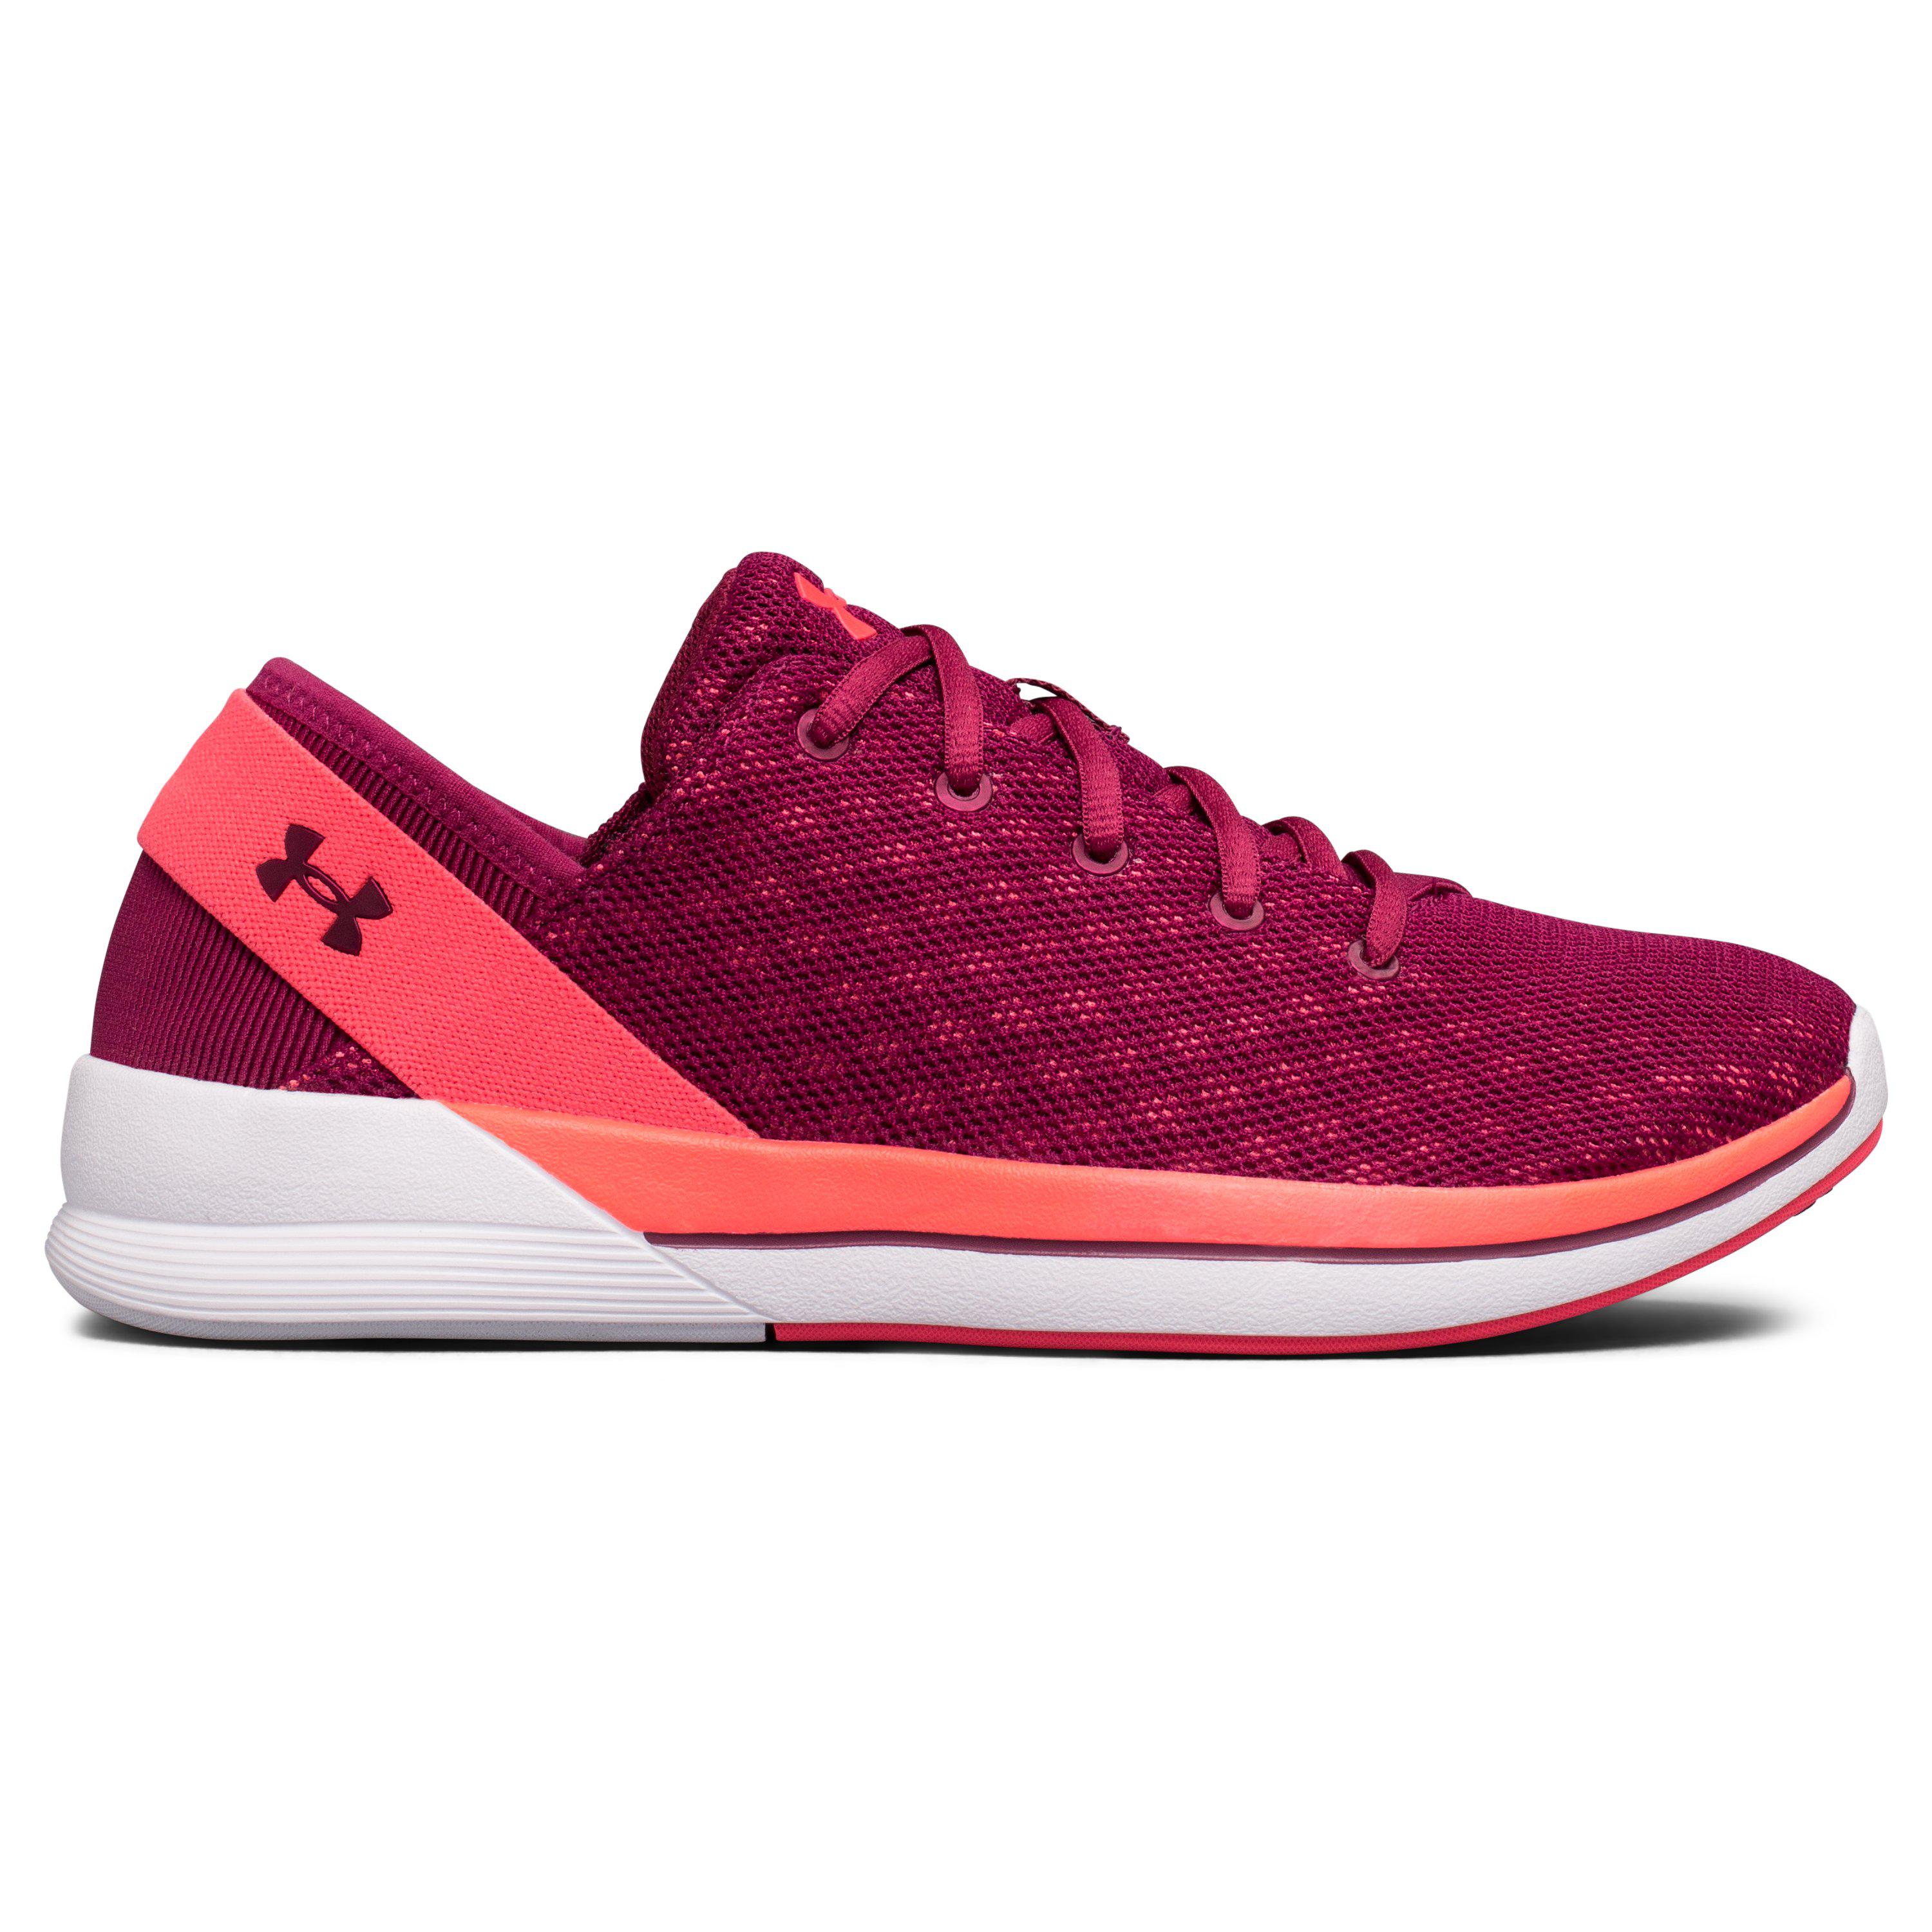 Under Armour Rubber Women's Ua Rotation Training Shoes in Red - Lyst